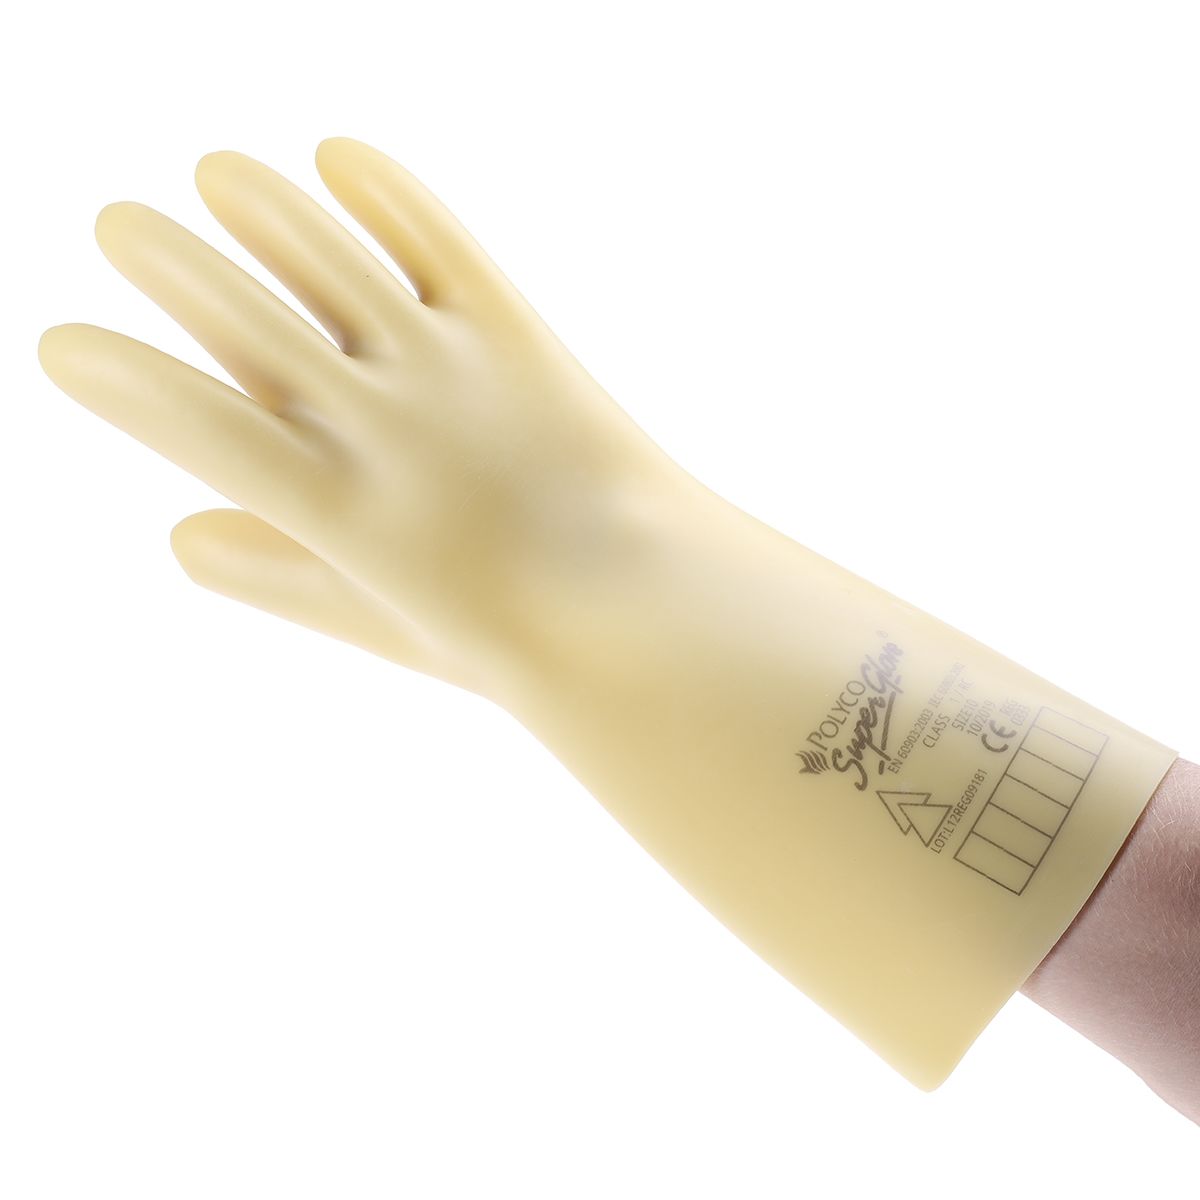 BM Polyco Electricians Gloves Brown Electrical Protection Electrical Insulating Gloves, Size 10, Large, Latex Lining